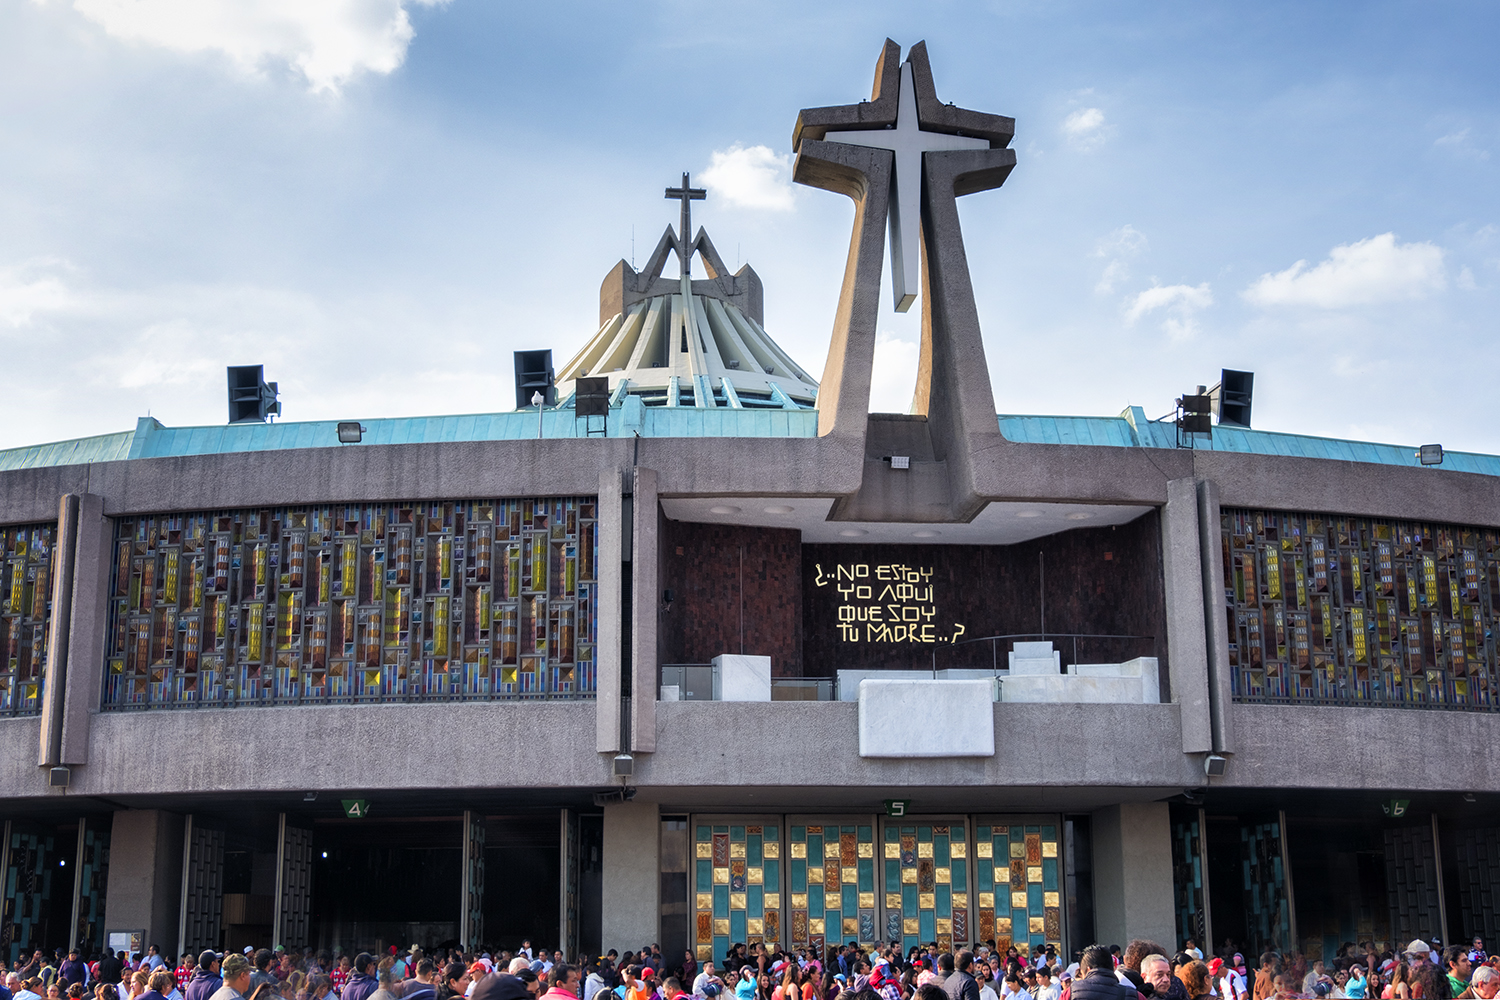 Basilica of Our Lady of Guadalupe, Mexico City